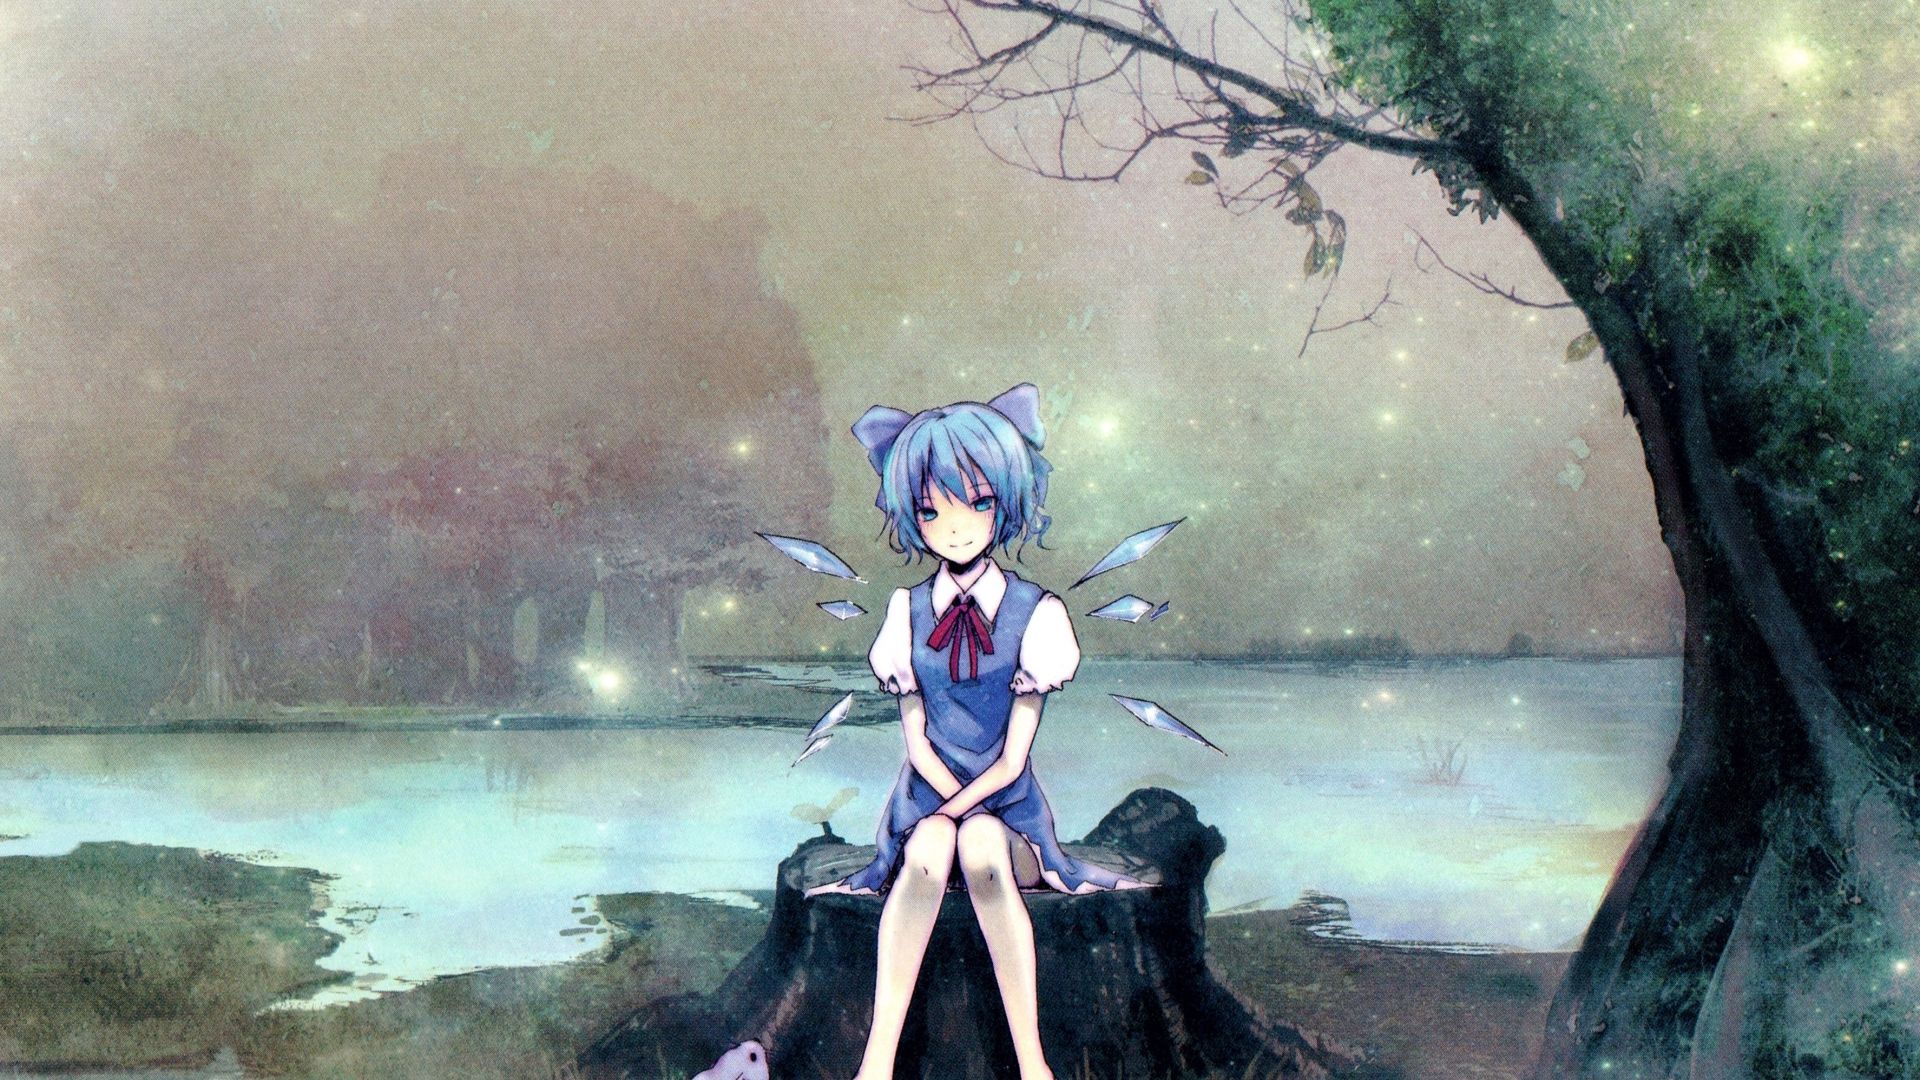 Desktop wallpaper cirno, touhou, anime girl, sit, outdoor, HD image, picture, background, 51e7b2